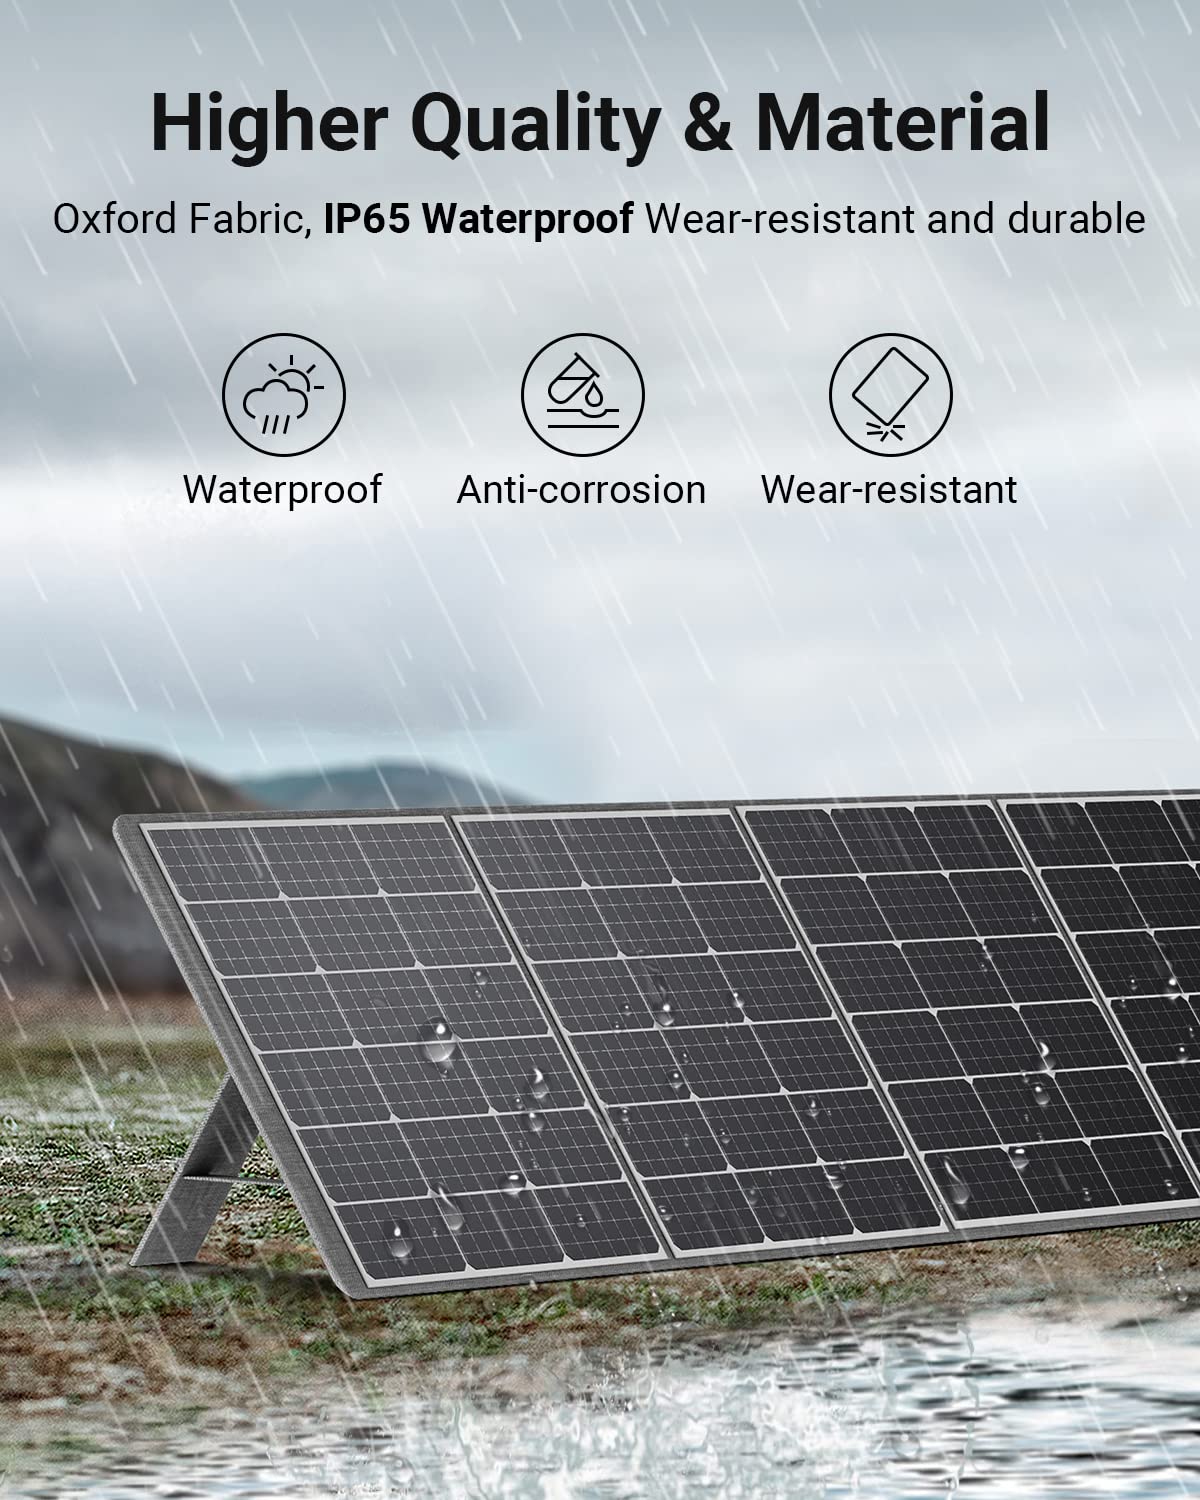 AFERIY ‎AF-S200 200W Portable Solar Panel  has a higher quality & material